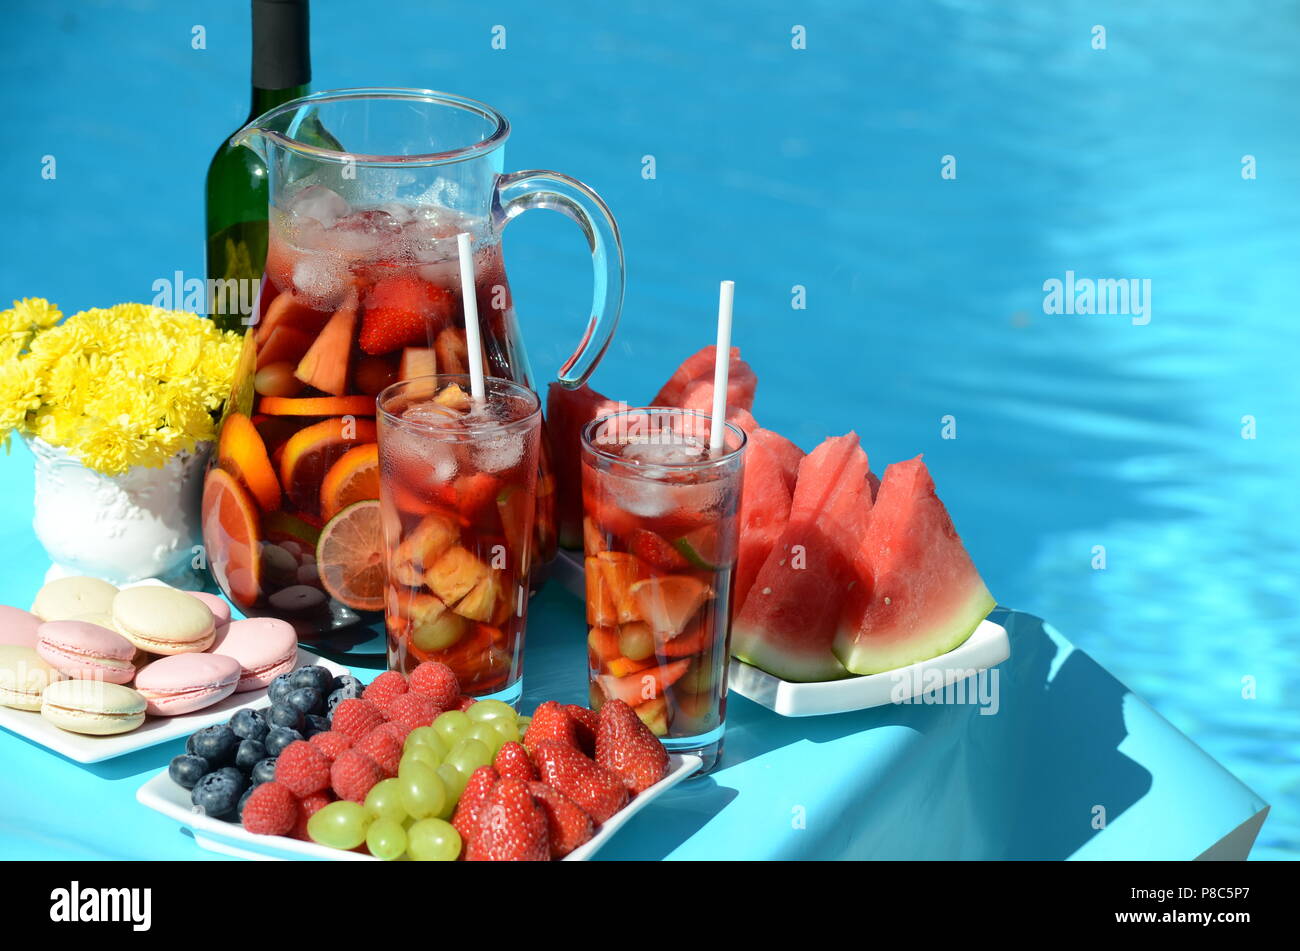 https://c8.alamy.com/comp/P8C5P7/pool-party-with-sangria-pitcher-fruit-cocktails-and-refreshments-by-the-swimming-pool-summer-lifestyle-topical-vacation-fun-and-relaxation-theme-P8C5P7.jpg